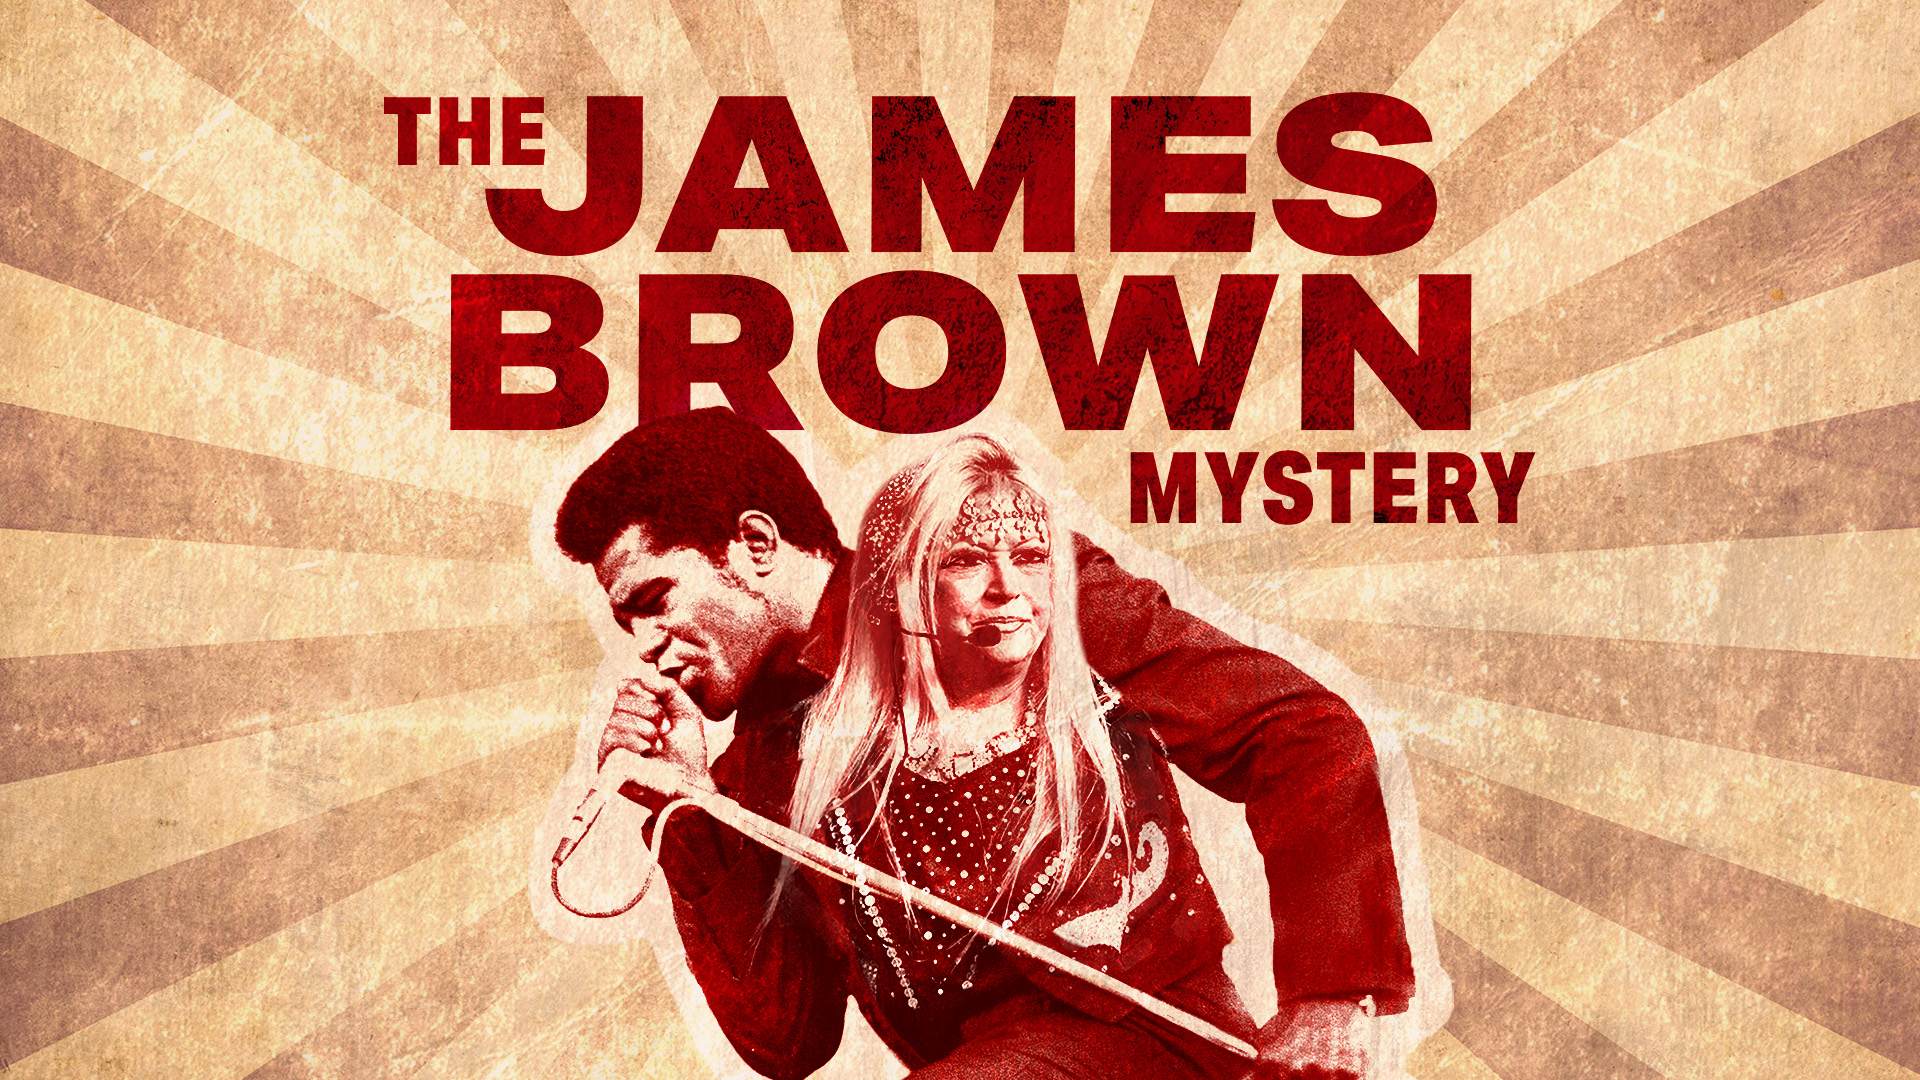 The James Brown Mystery podcast